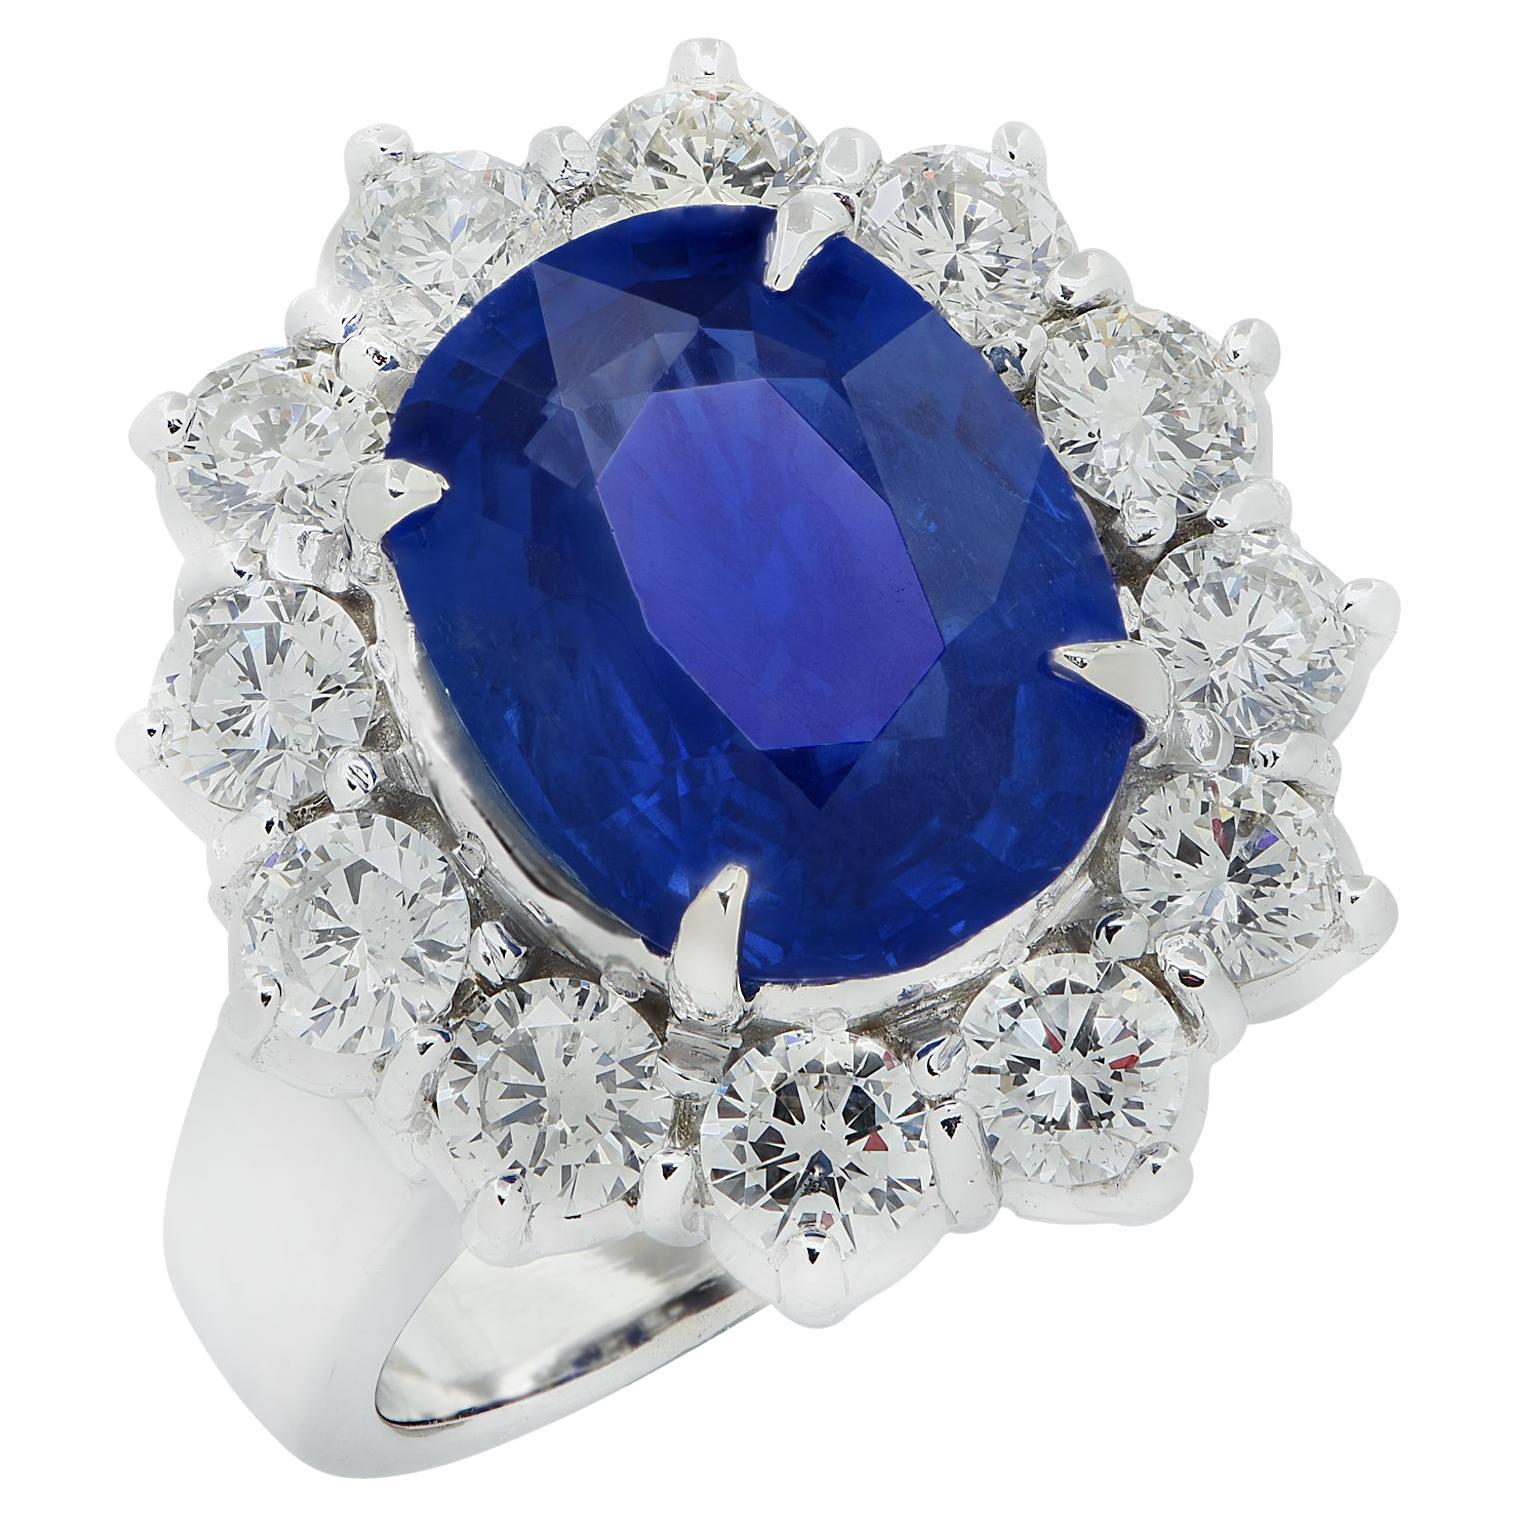 What is a blue diamond worth?